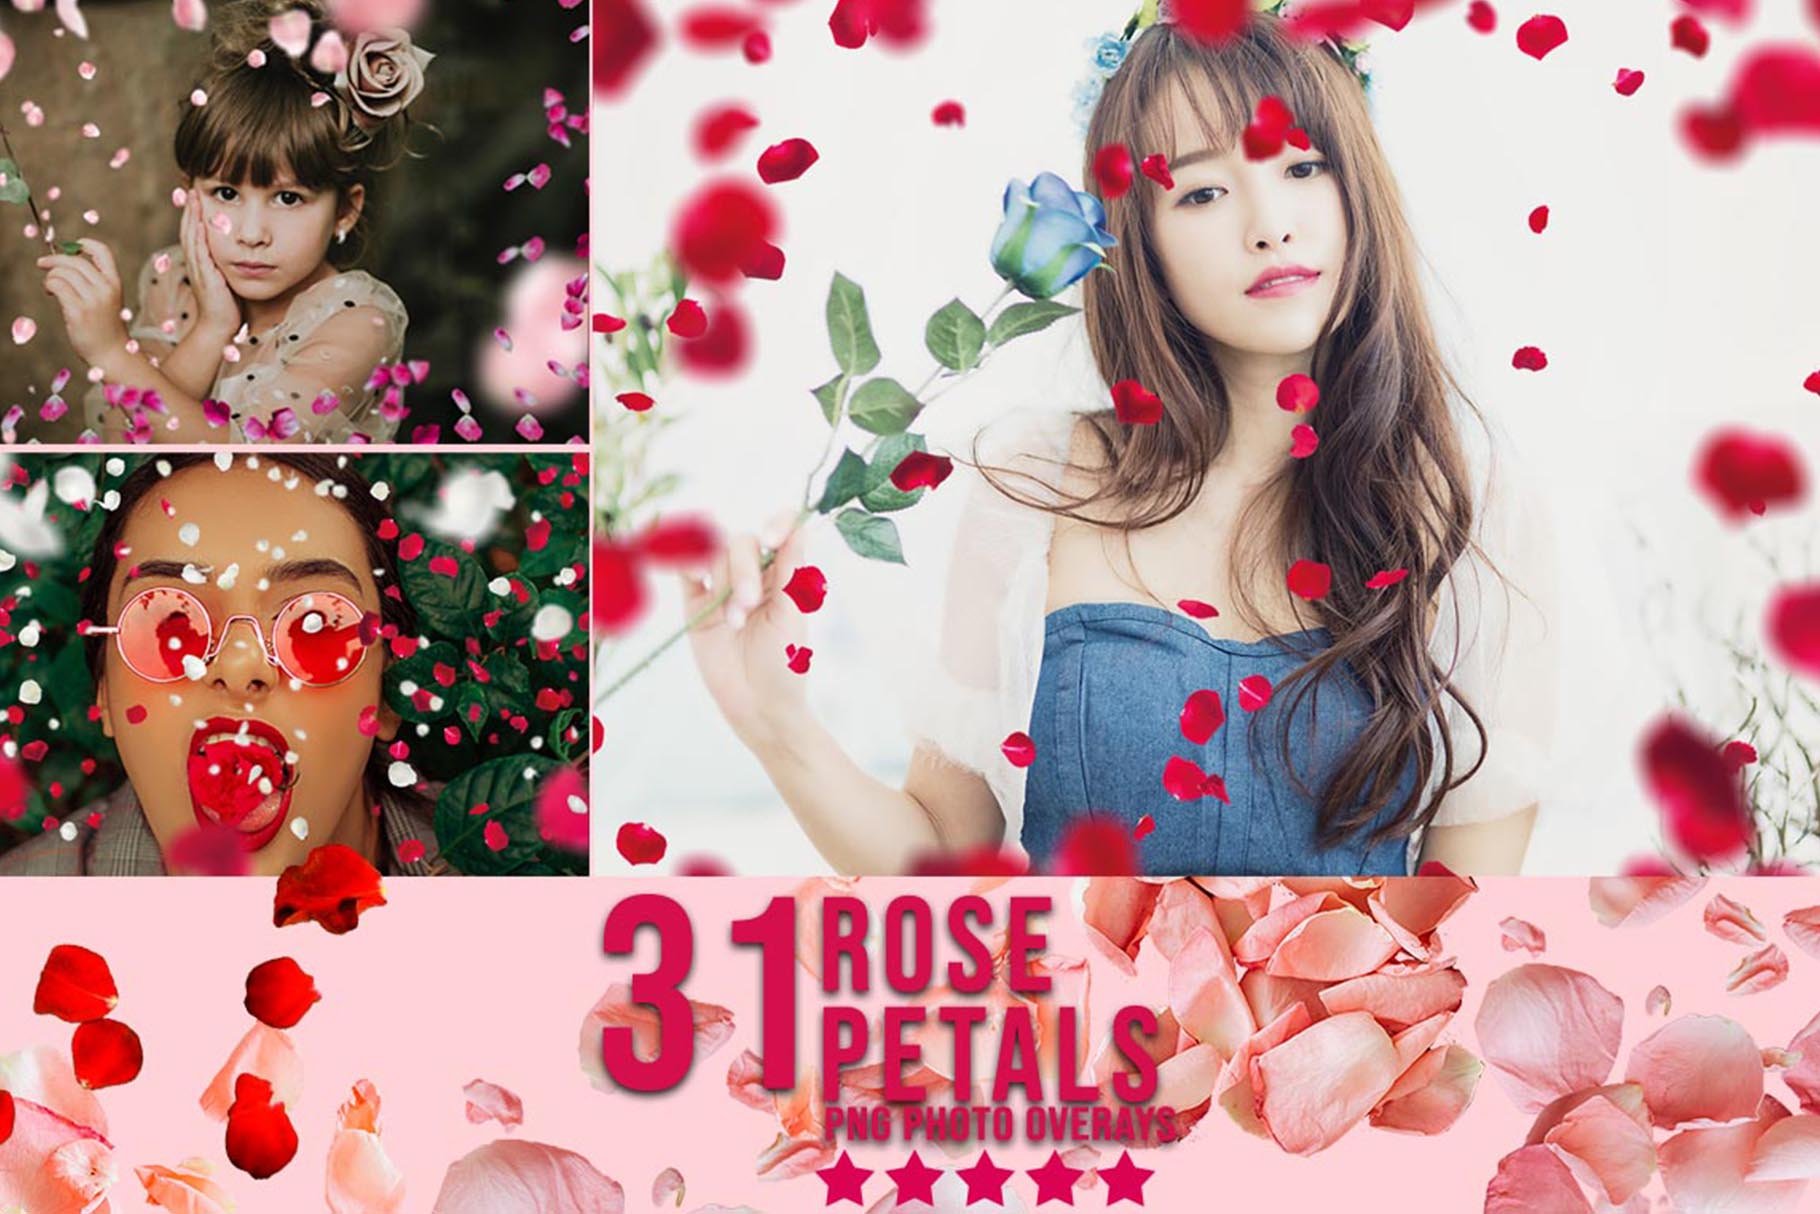 31 Rose Petals Photo Overlaycover image.